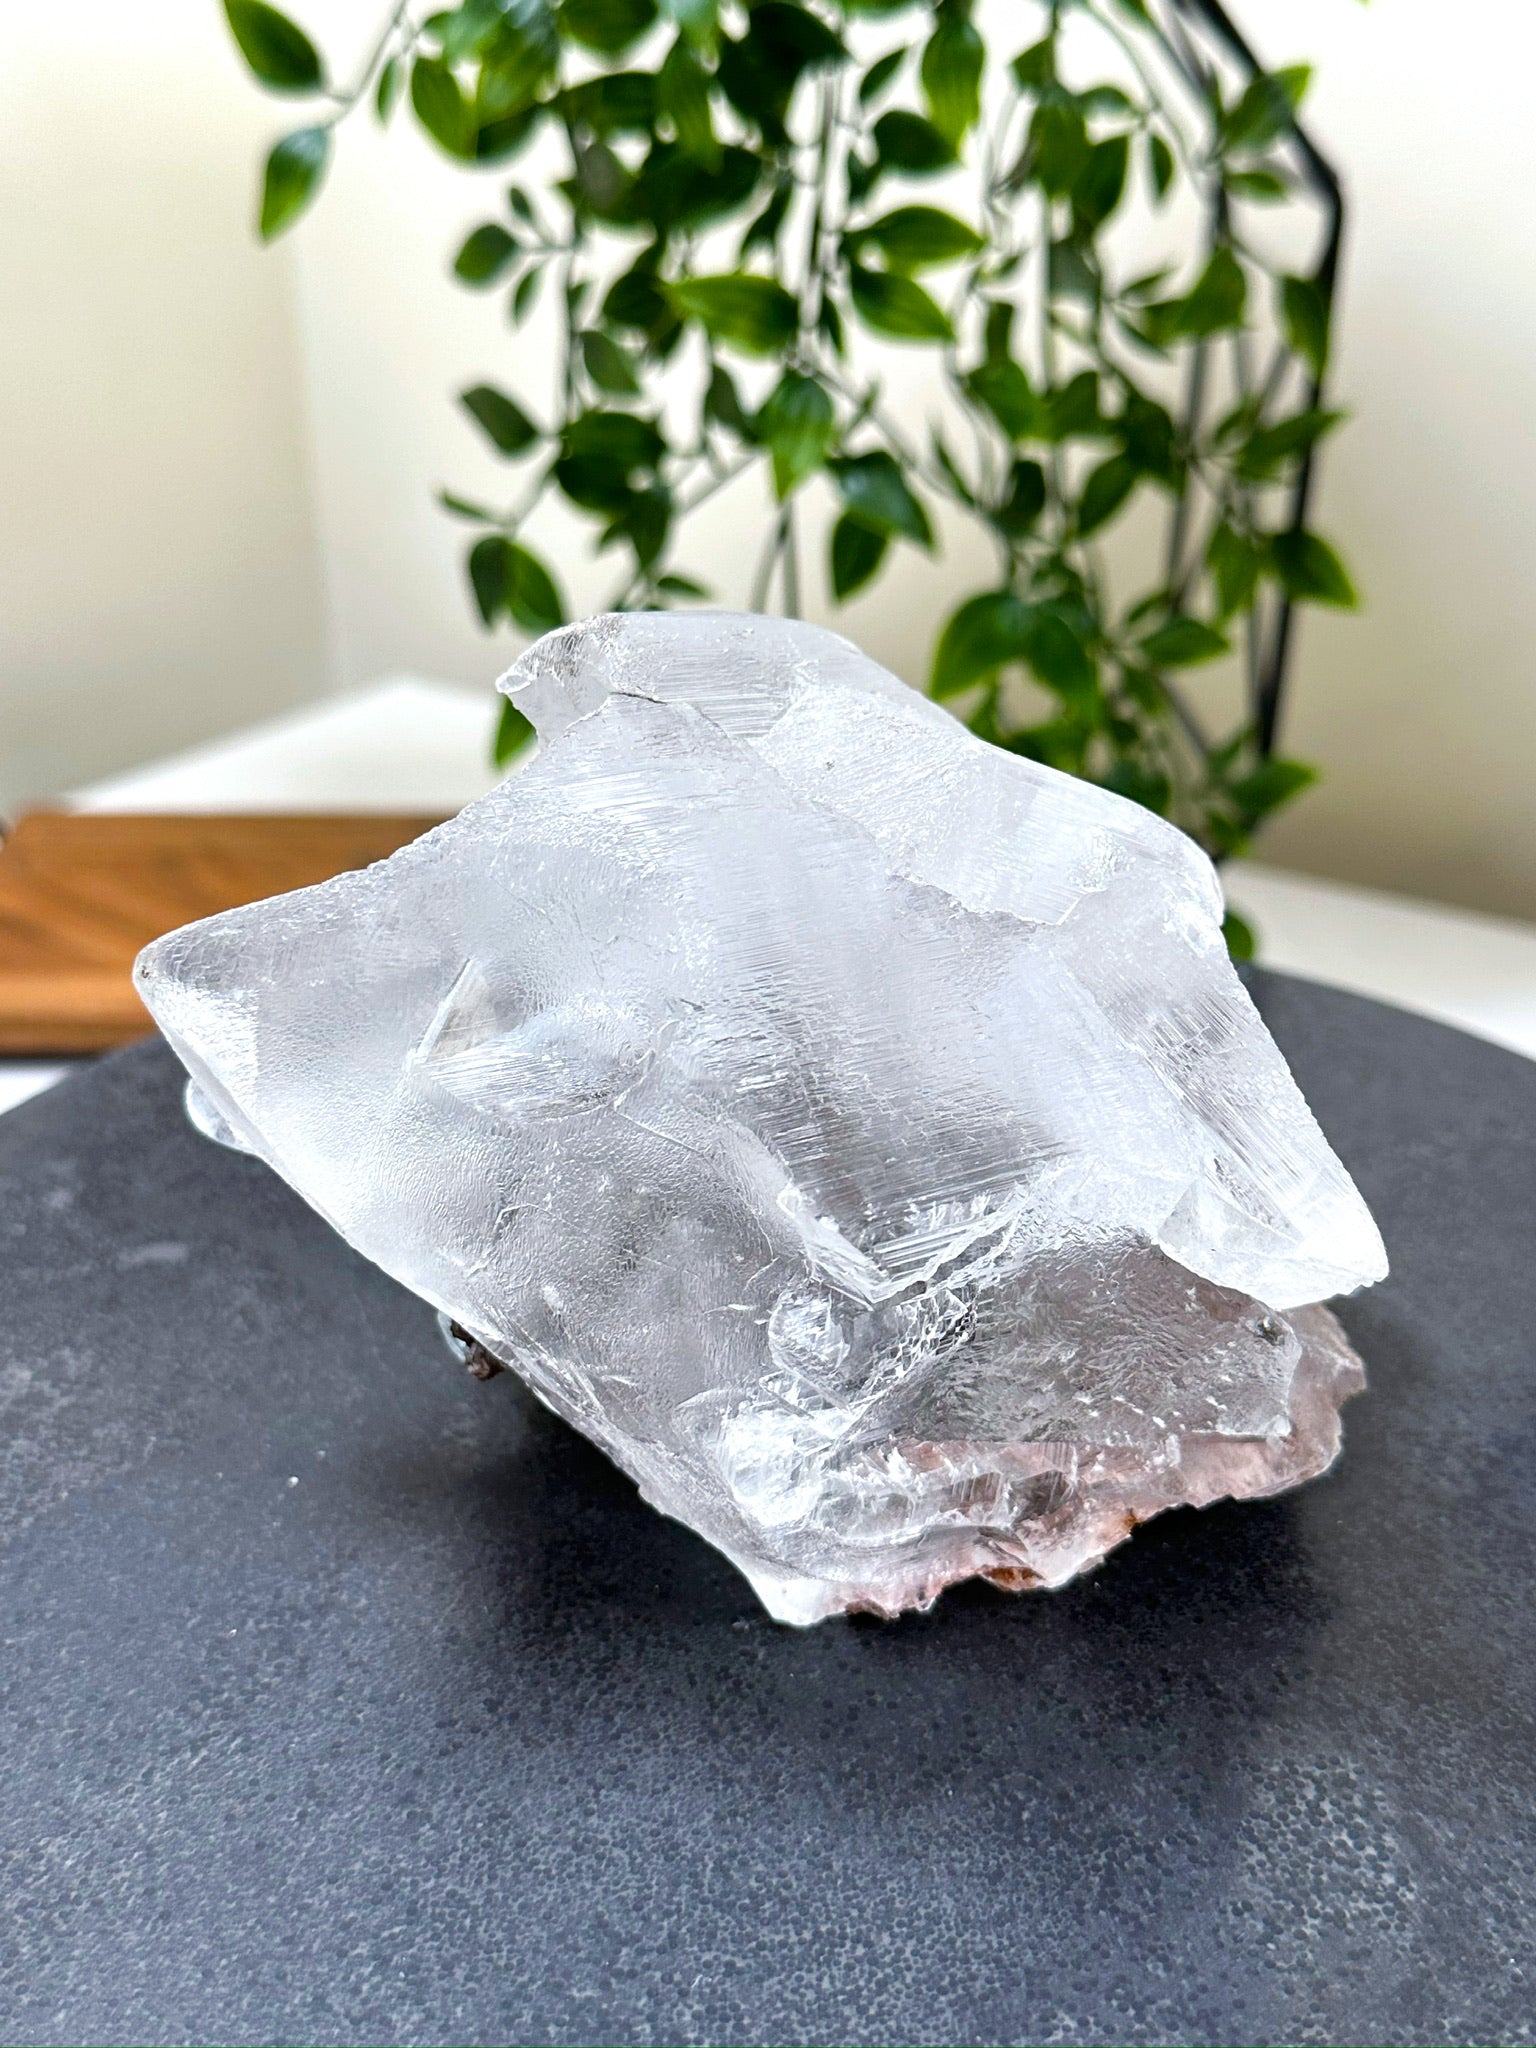 NAICA SELENITE 1 - naica mine, naica selenite, once in a blue moon, one of a kind, Recently added, selenite - The Mineral Maven